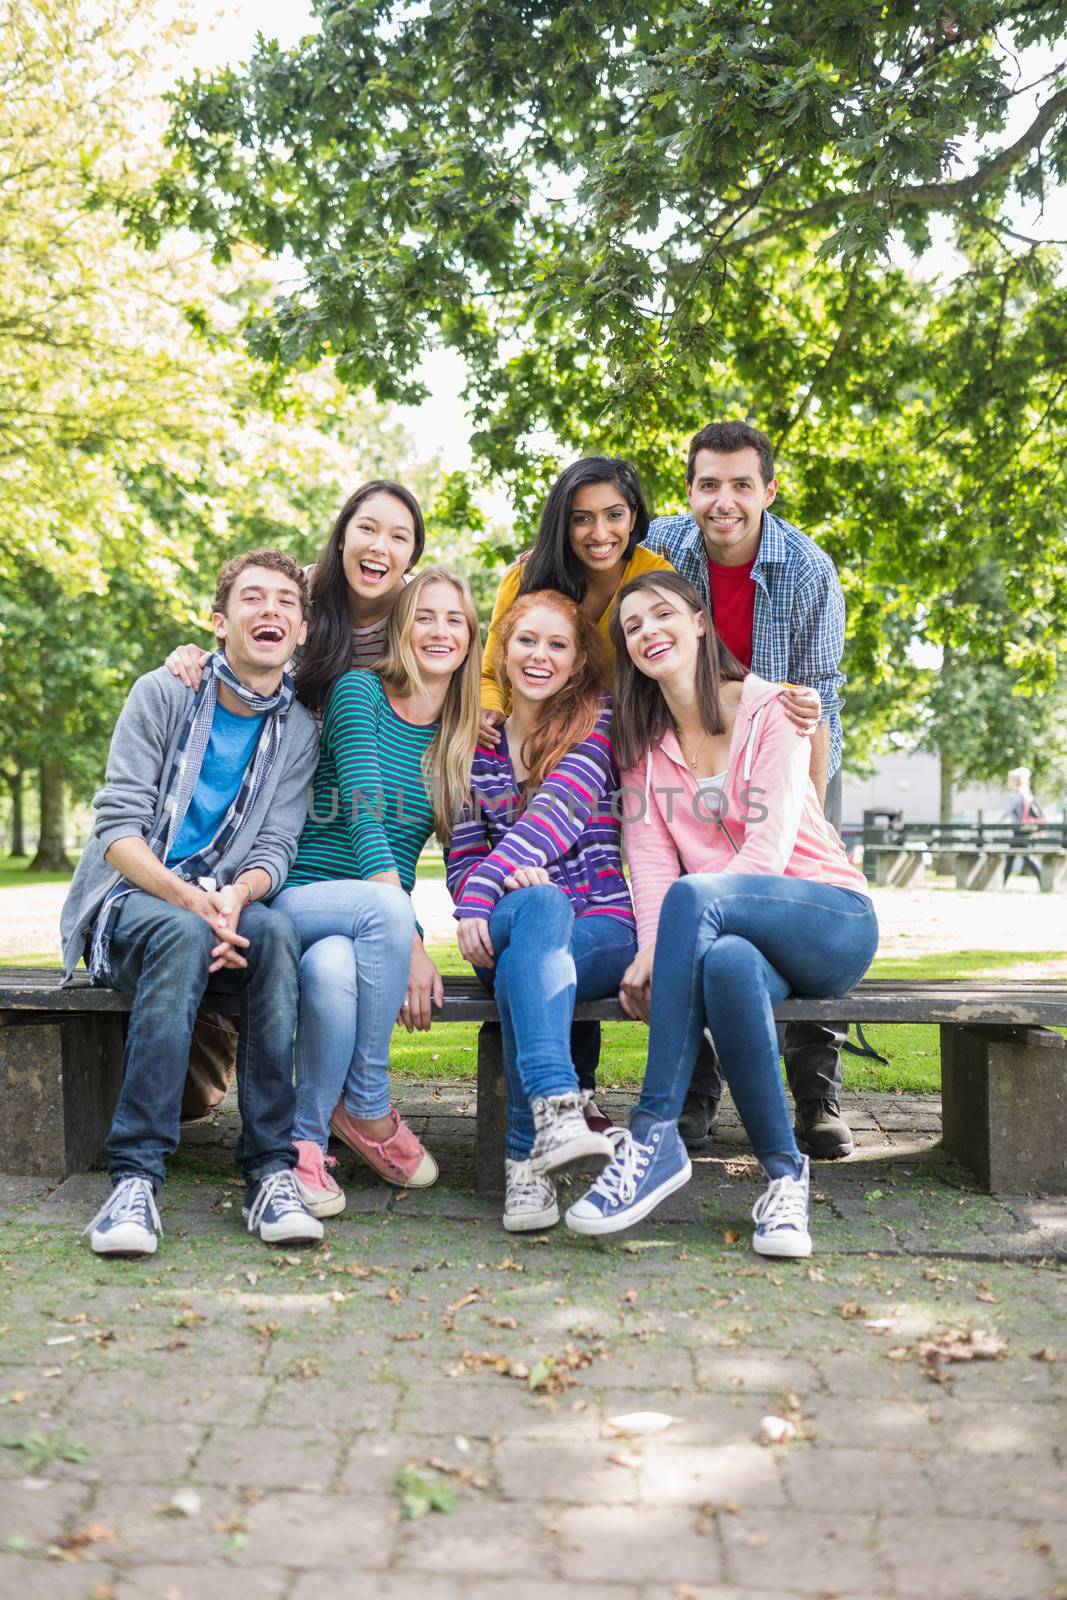 Group portrait of young college students in the park